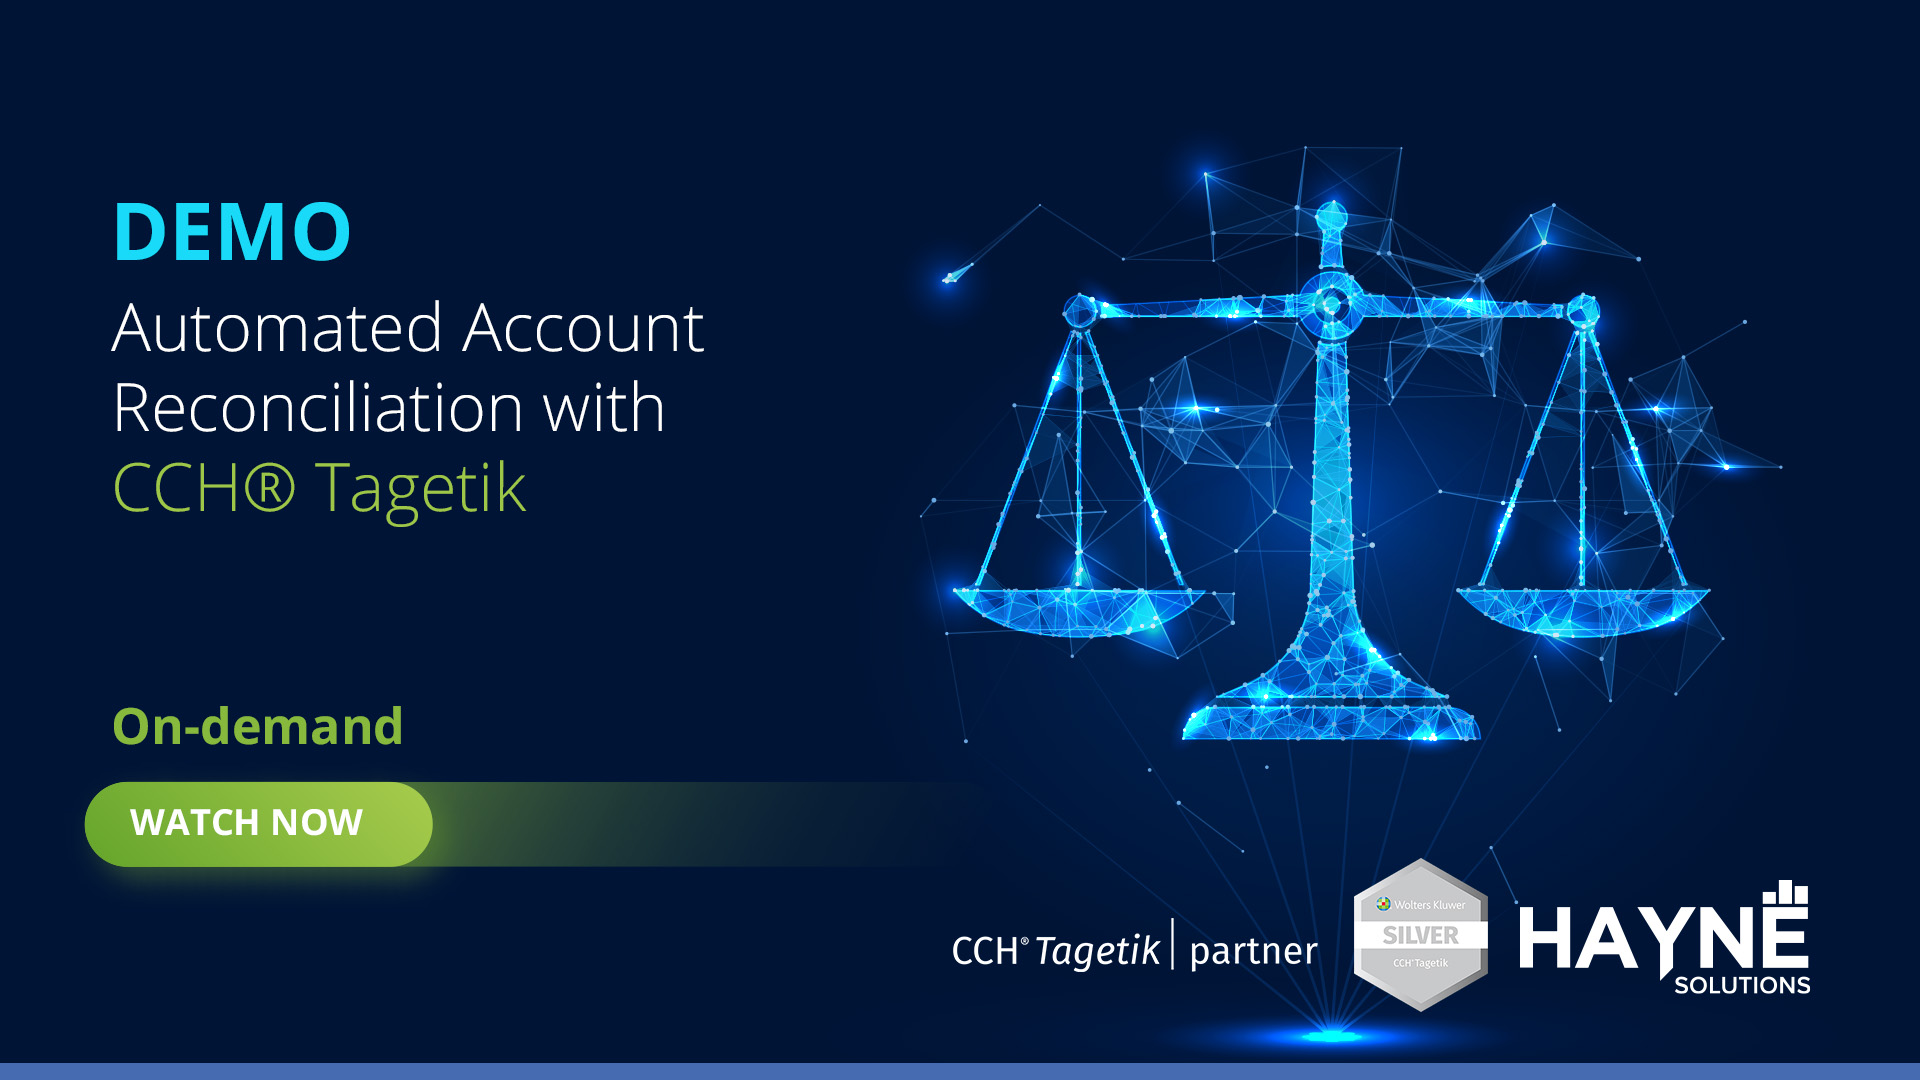 DEMO: Automated Account Reconciliation with CCH® Tagetik